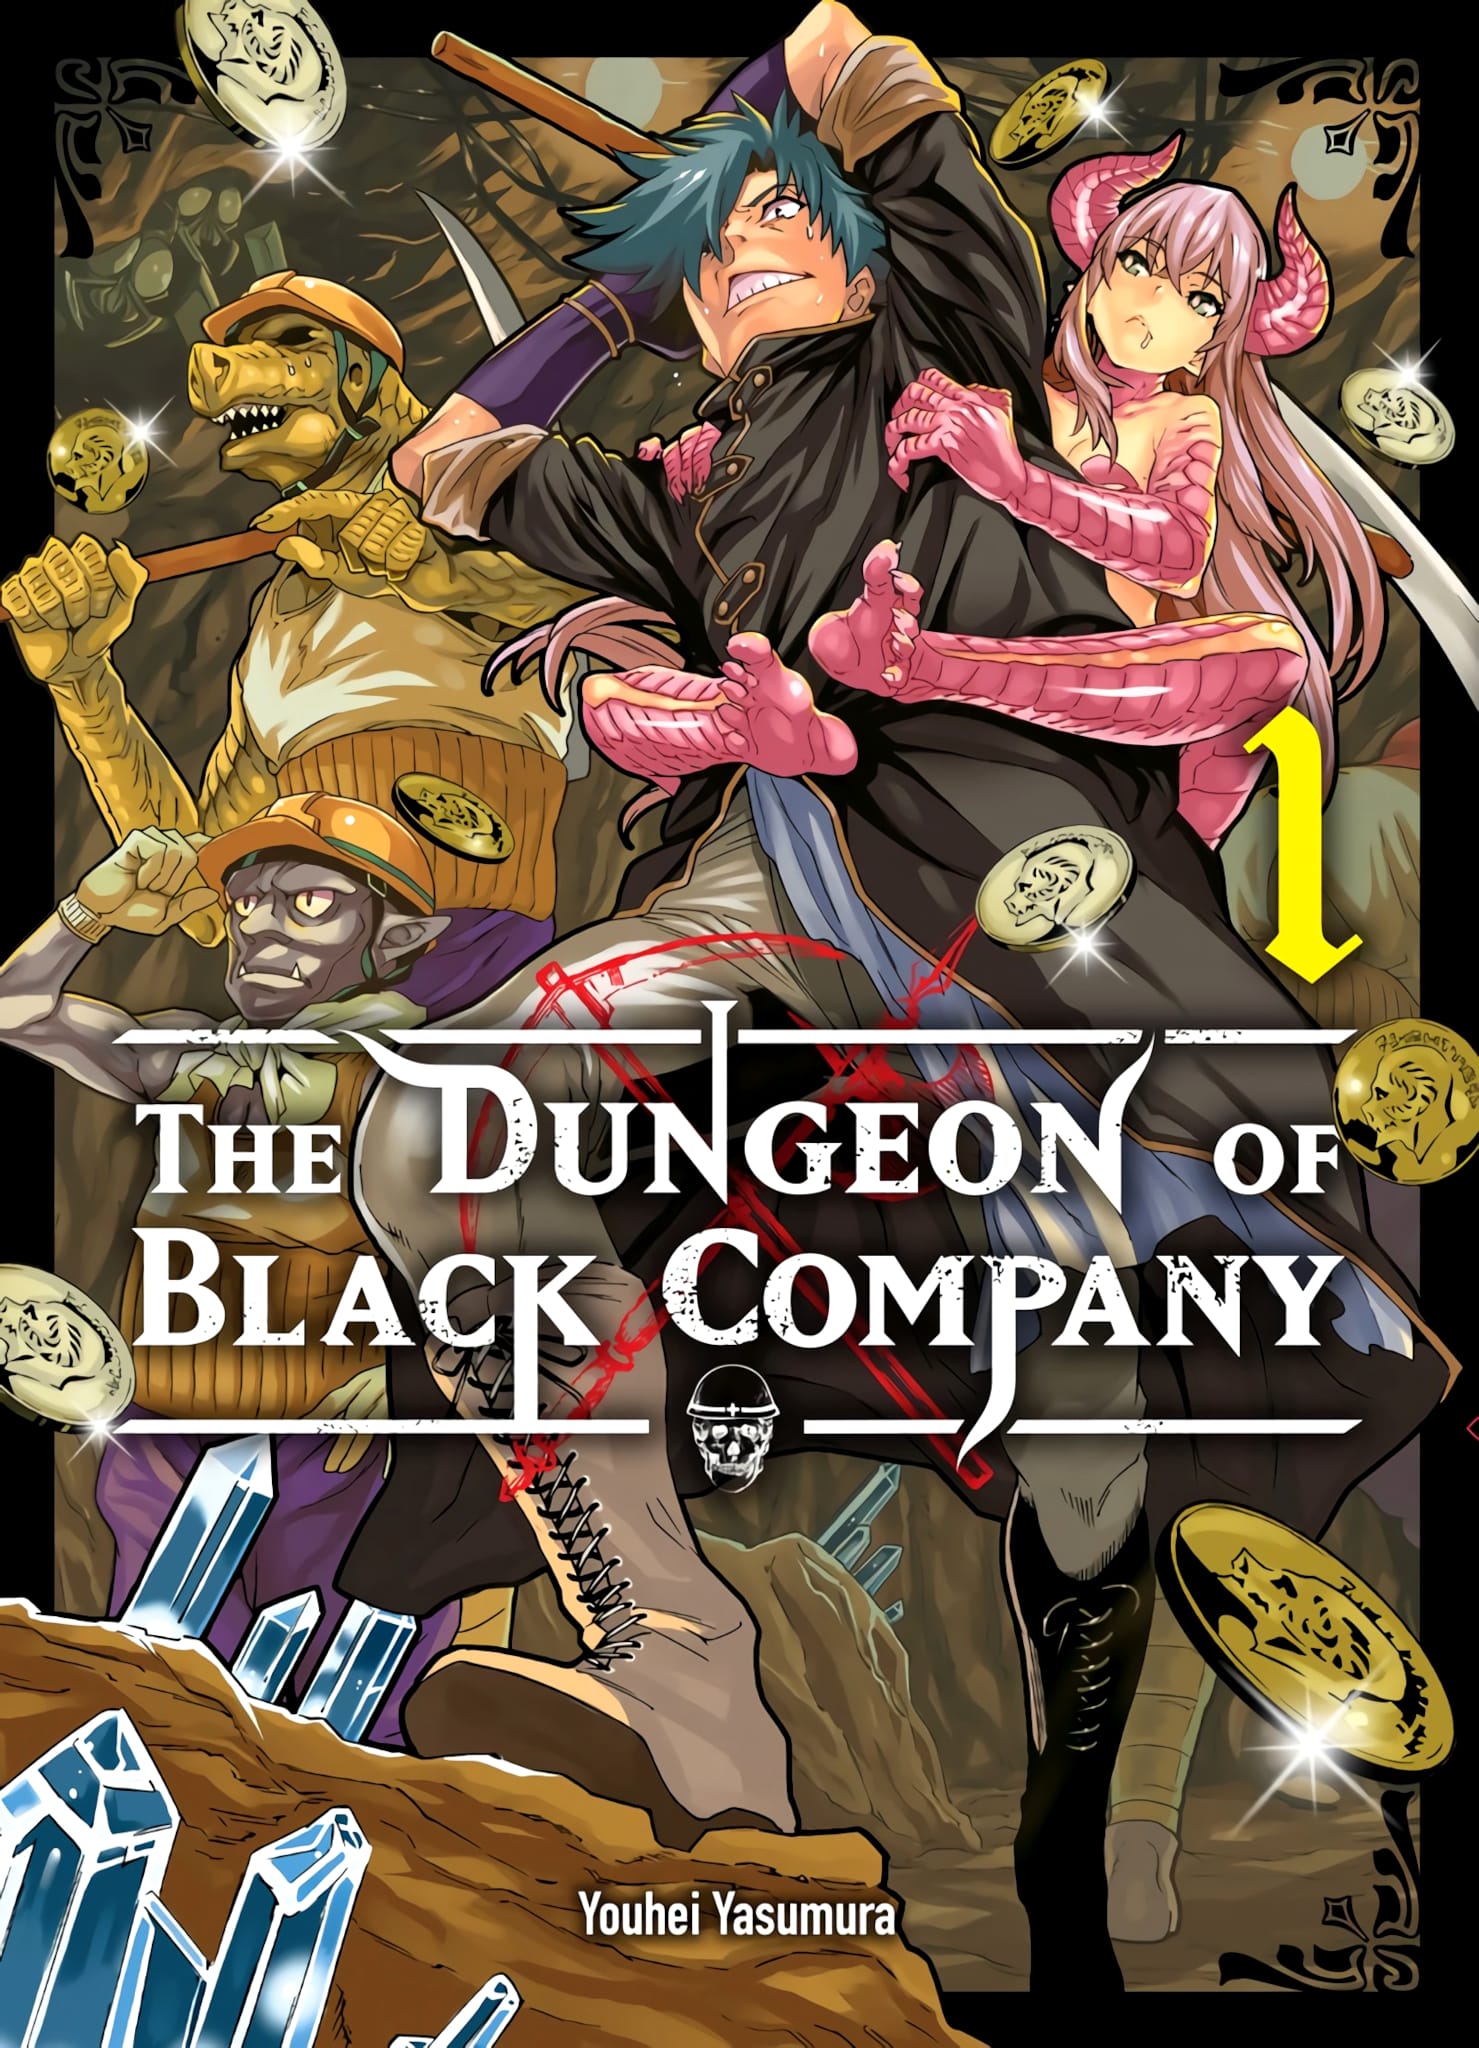 Tome 1 du manga The Dungeon of Black Company